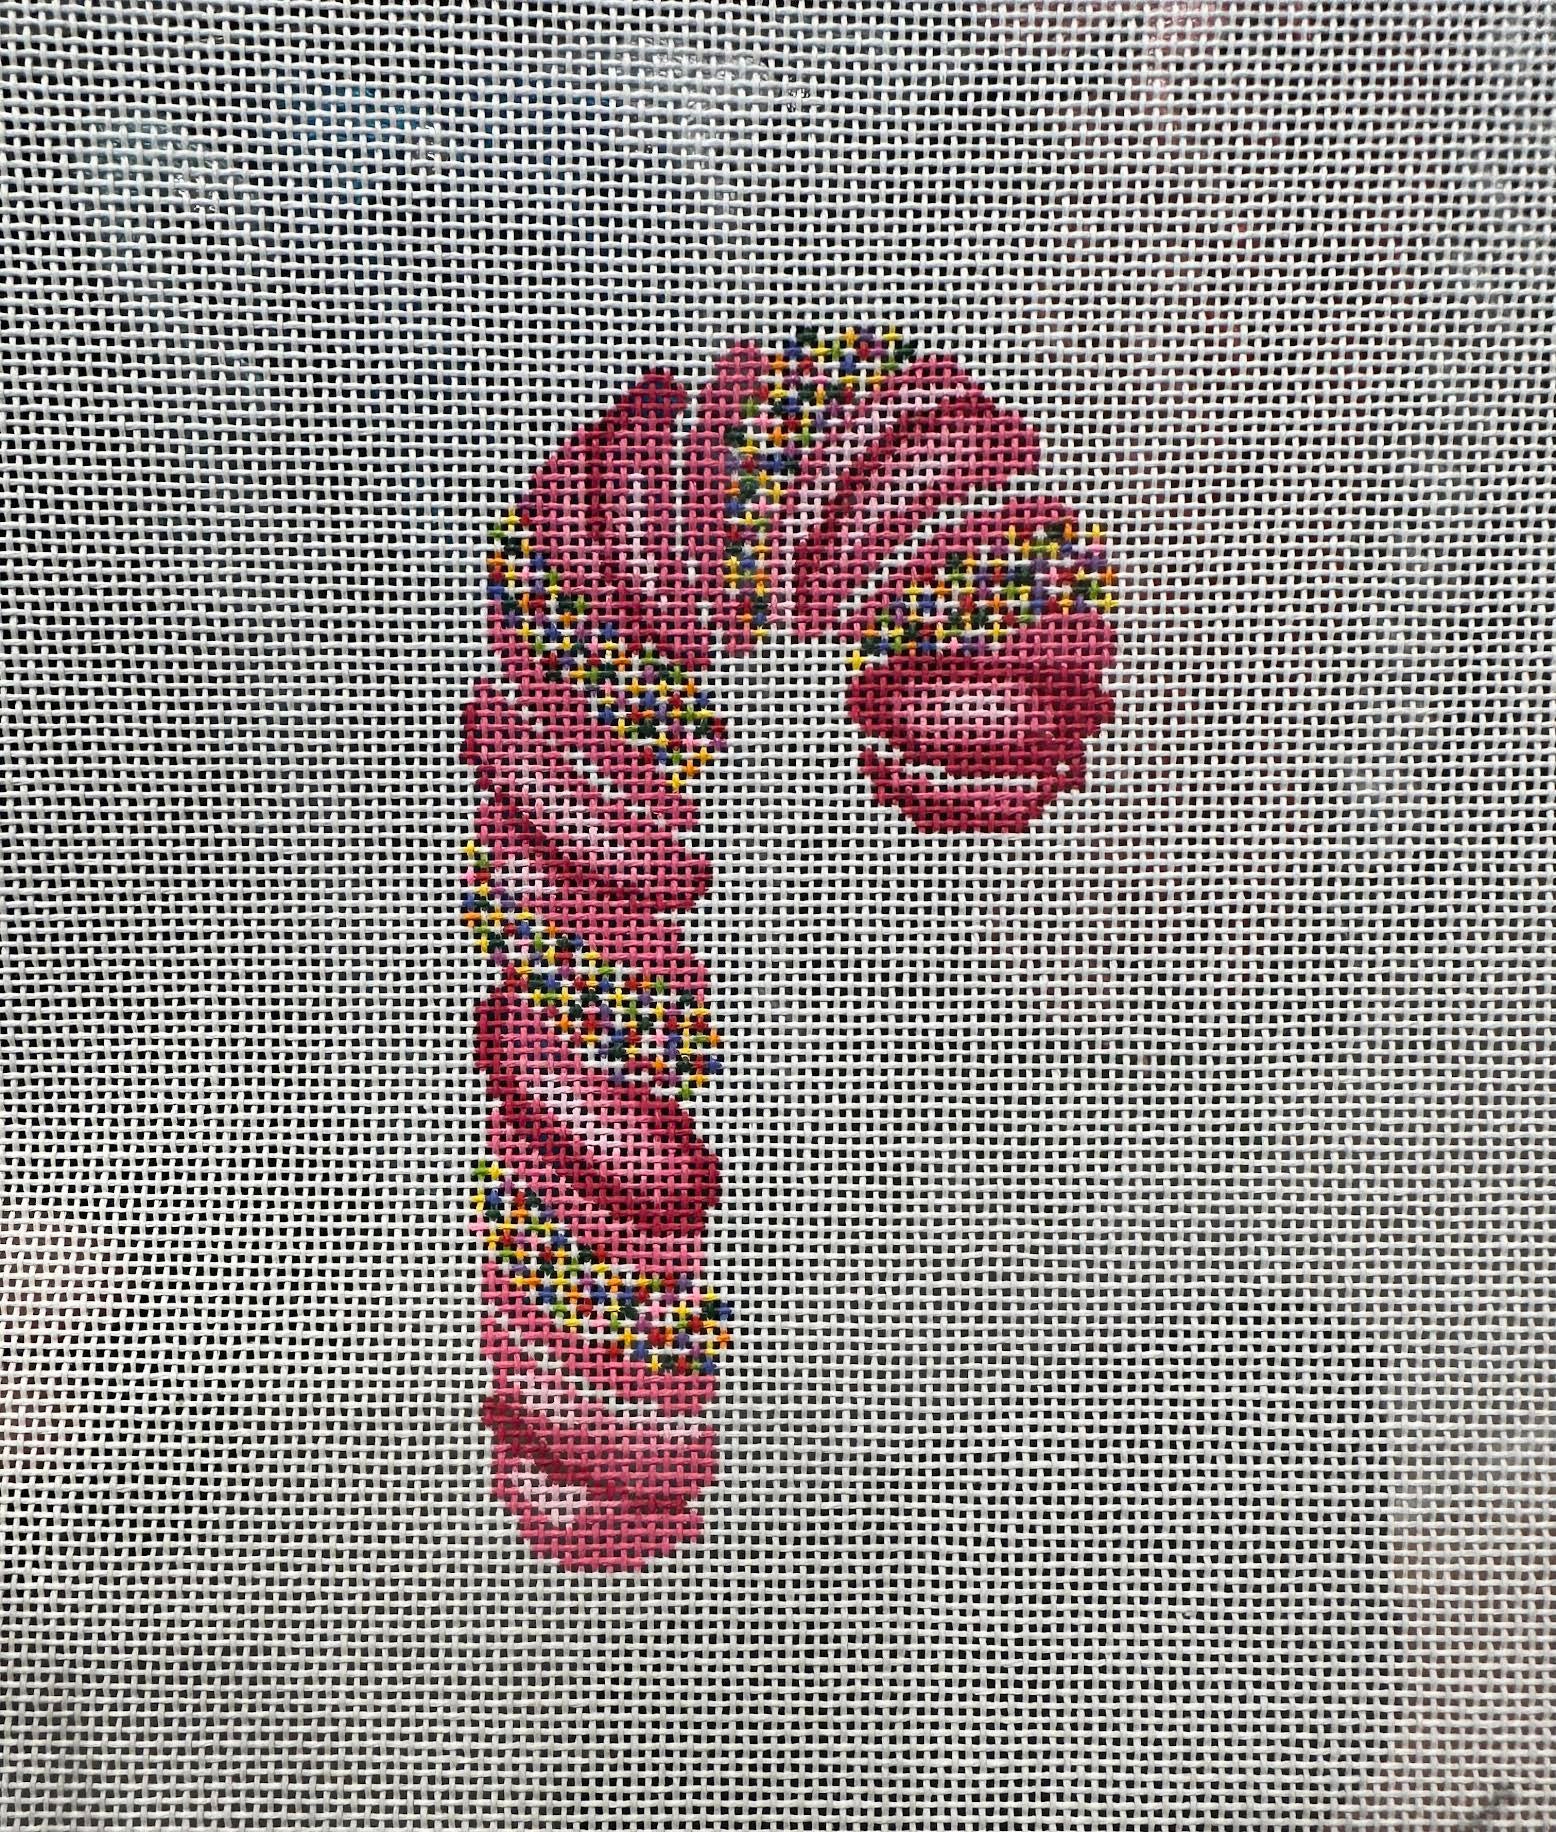 Blueberry Point Canvas 23-244 Sprinkly Candy Cane - Pink